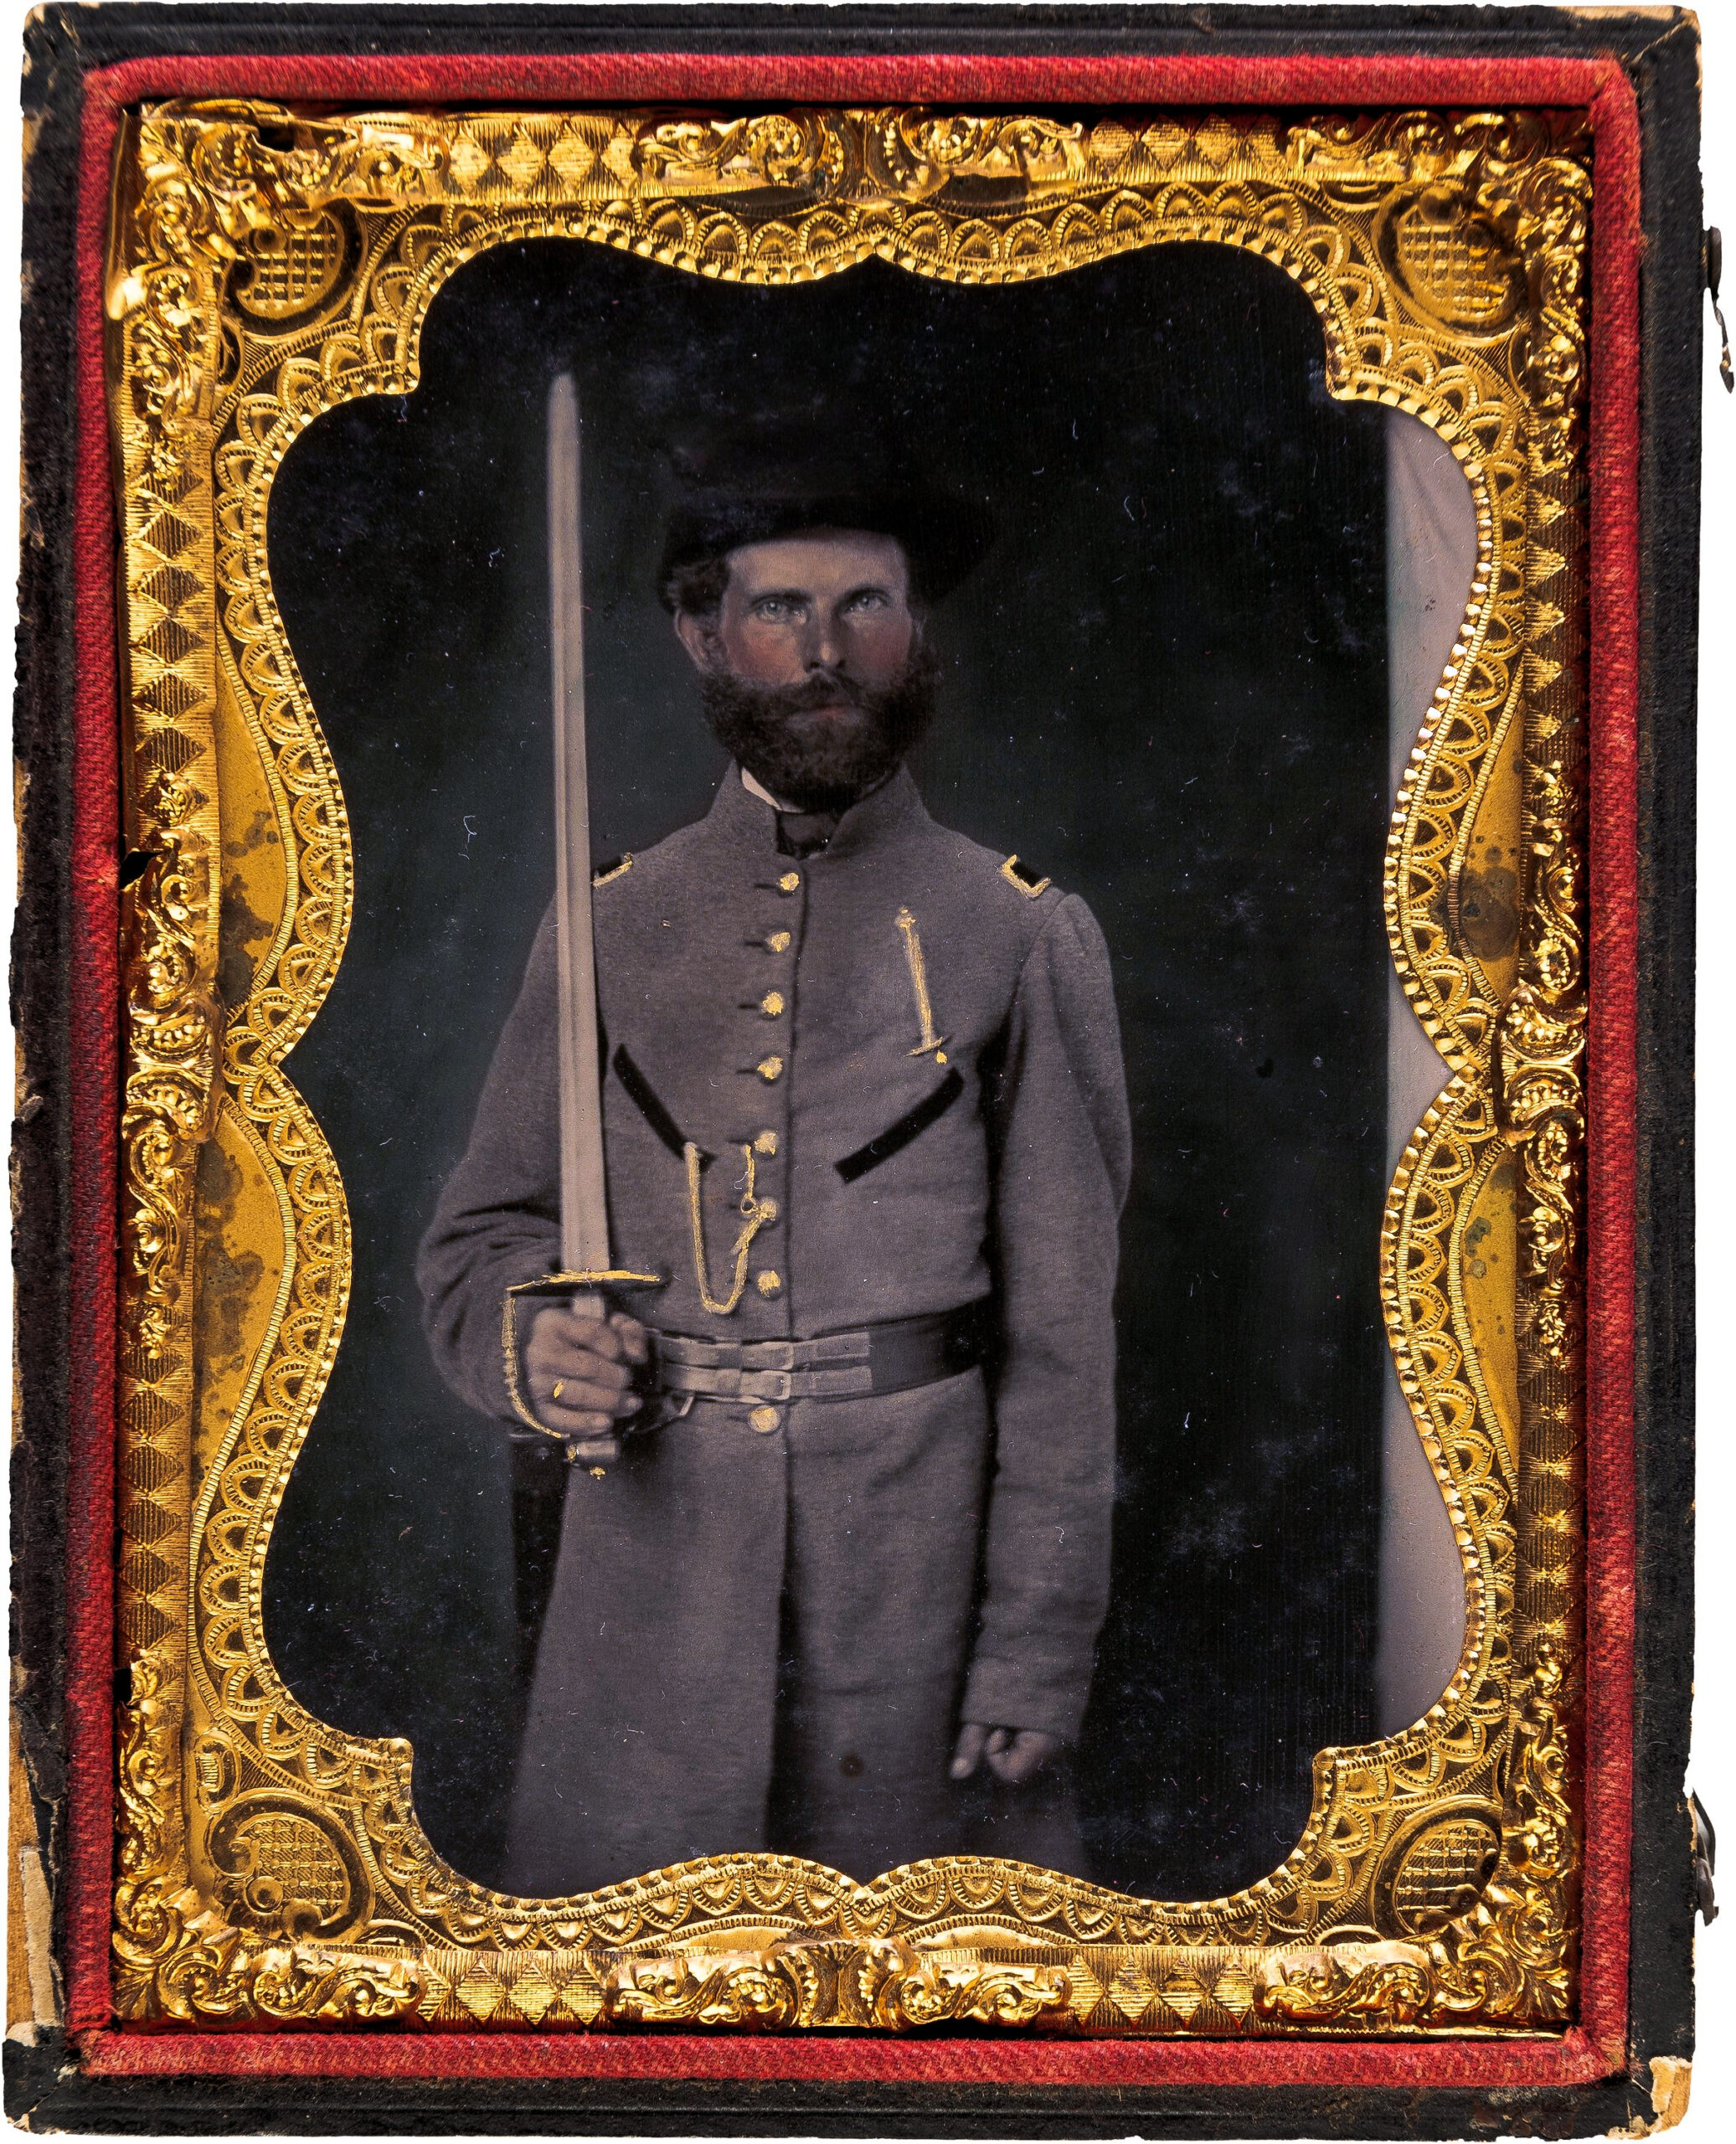 Confederate Soldier Quarter Plate Tintype. Stunning 1861 Melainotype of a Confederate officer.